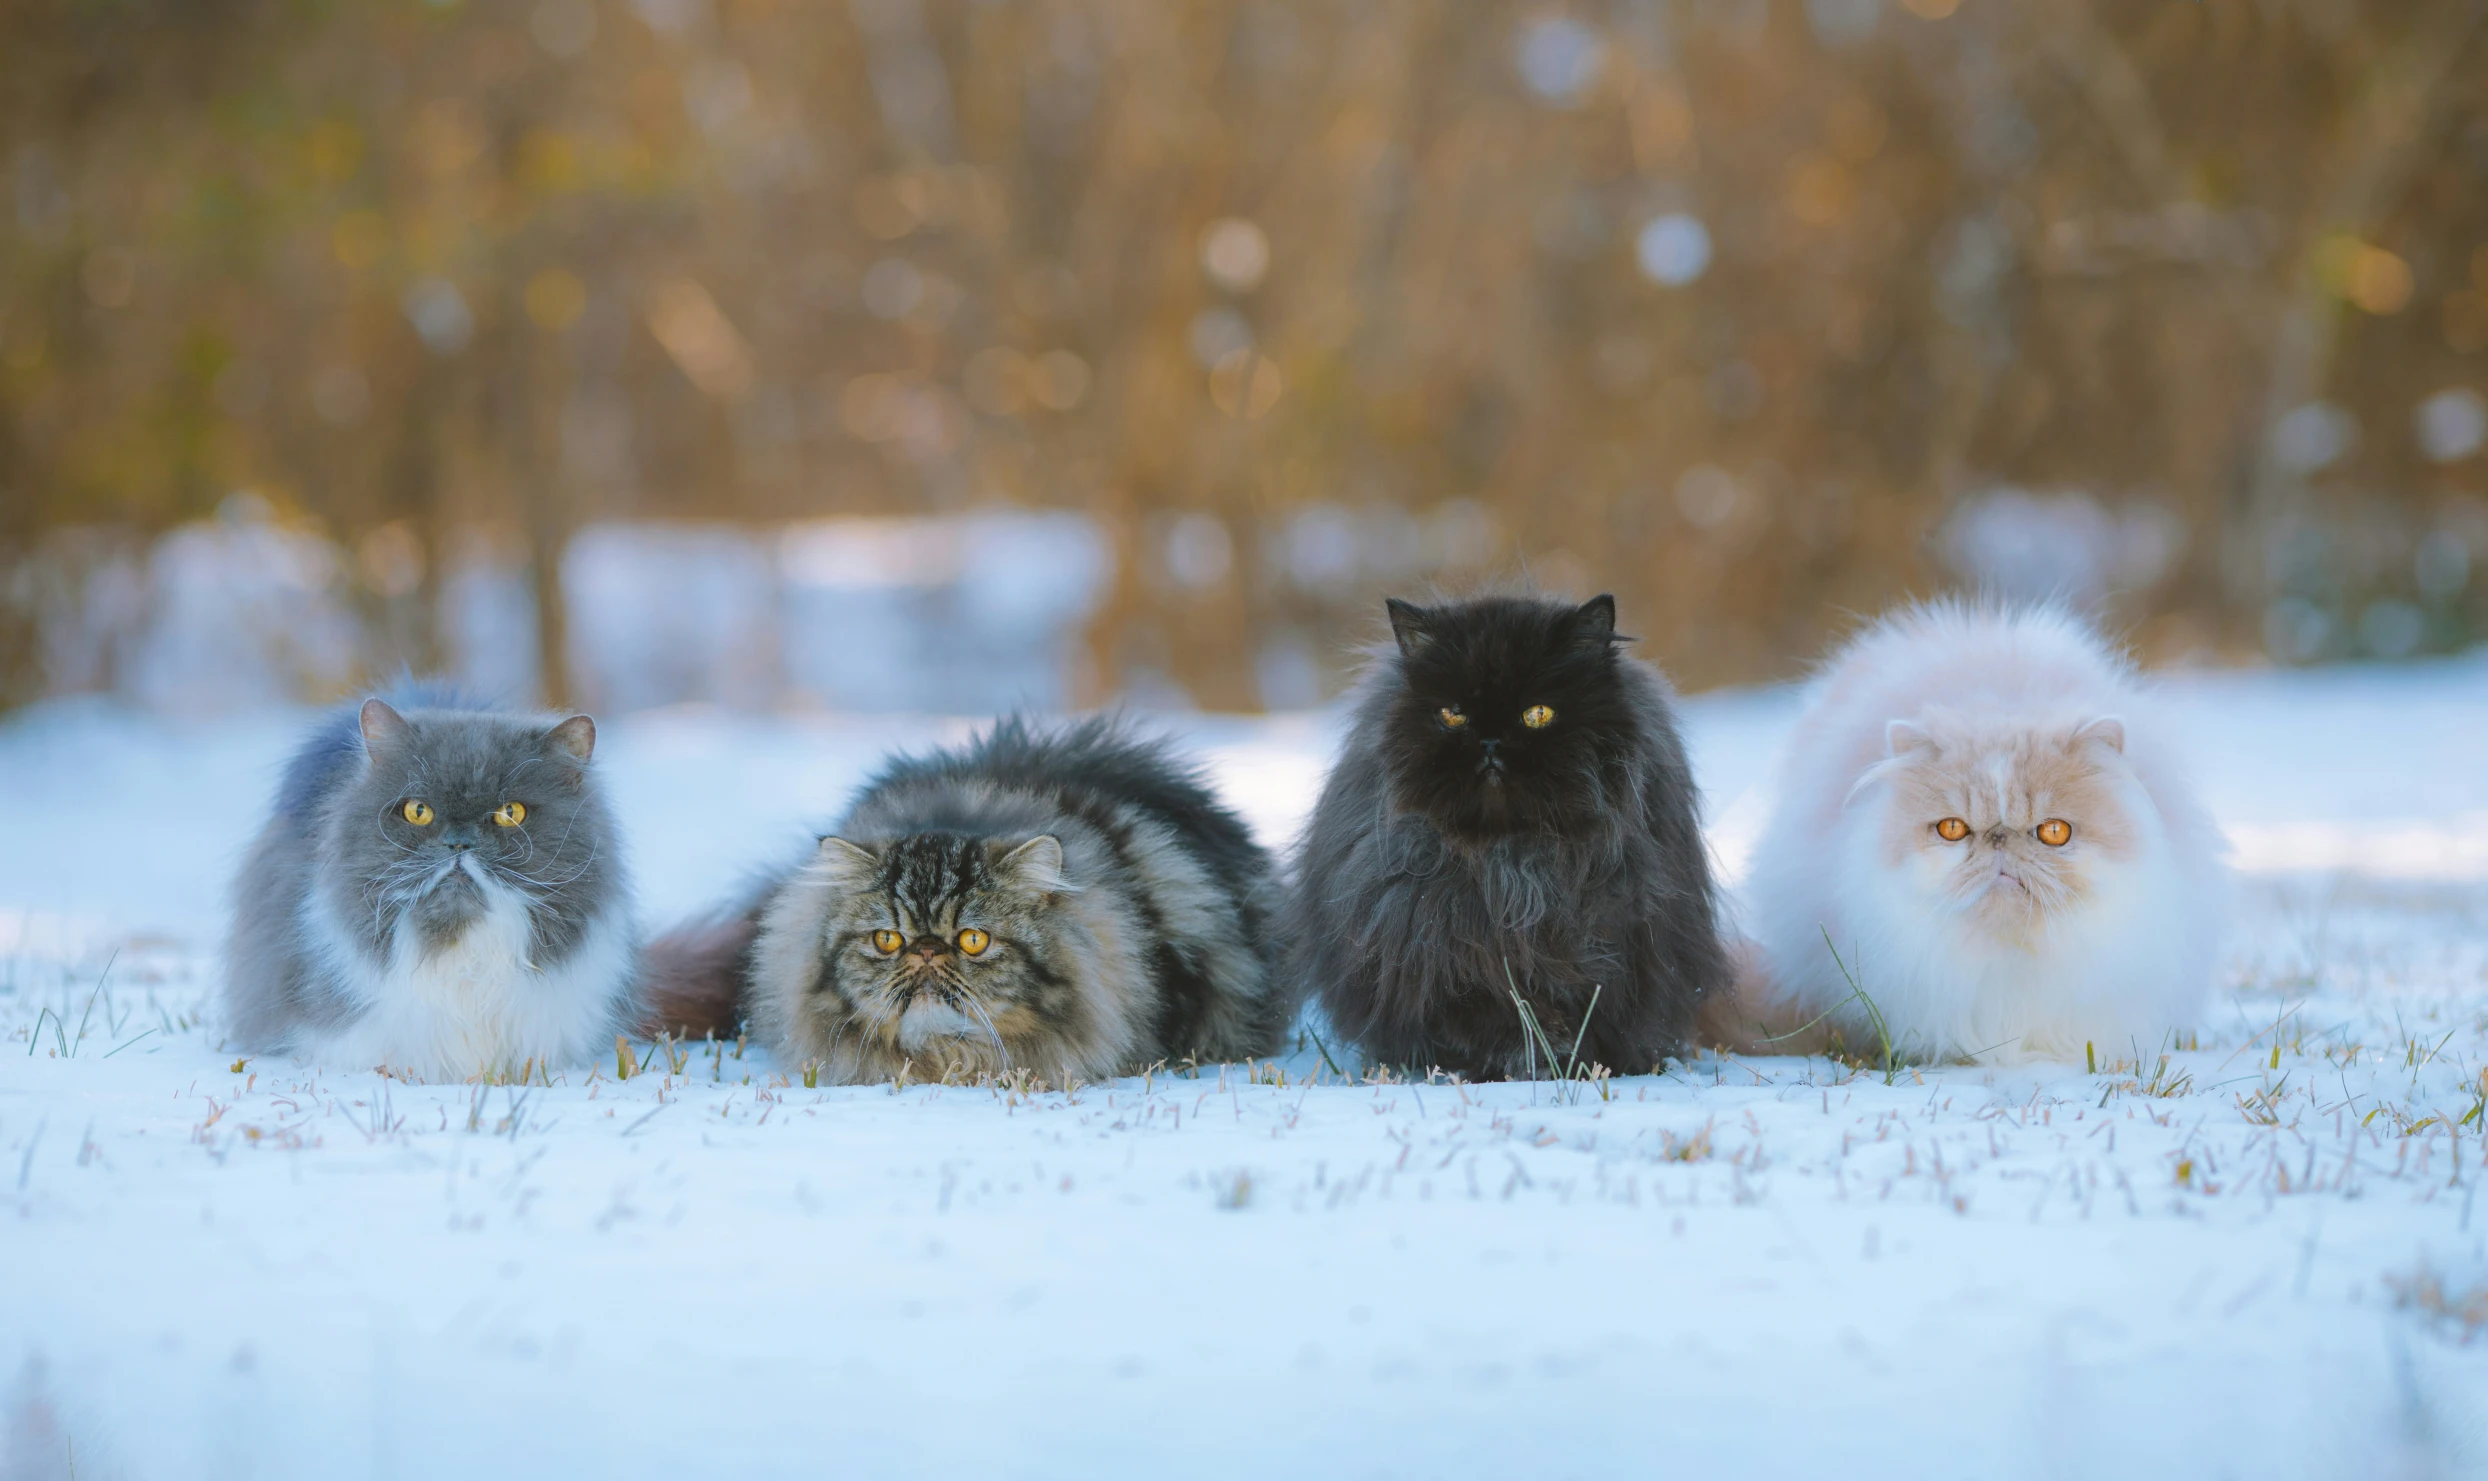 group of cats, all black and white, on a snowy field